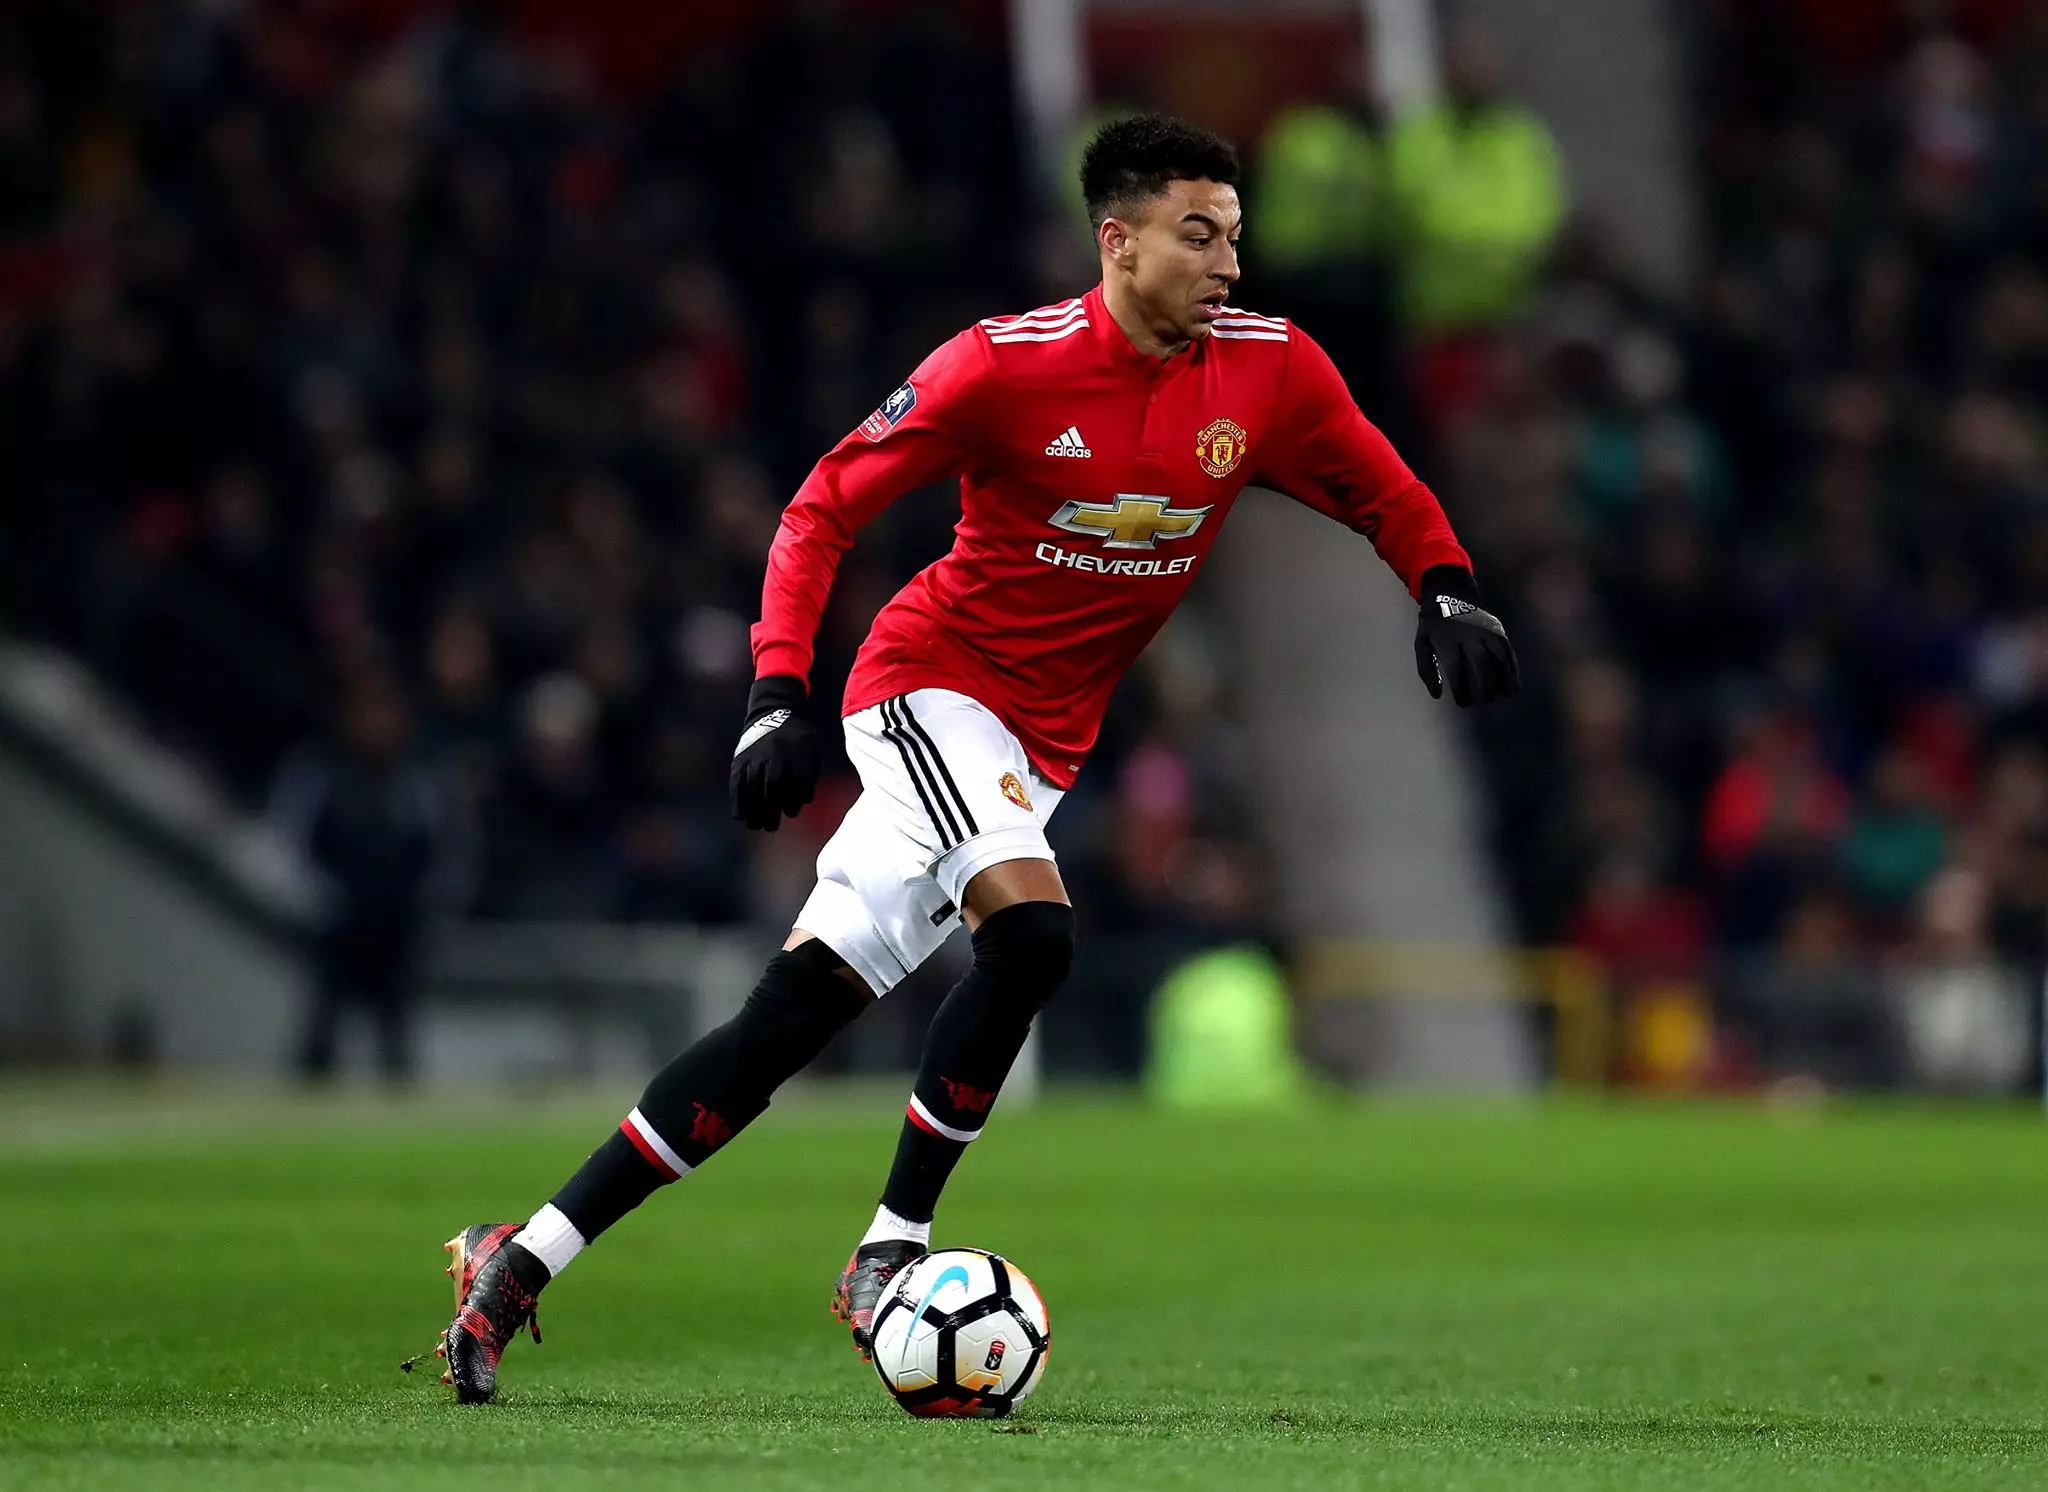 Lingard in action for United. Image: PA